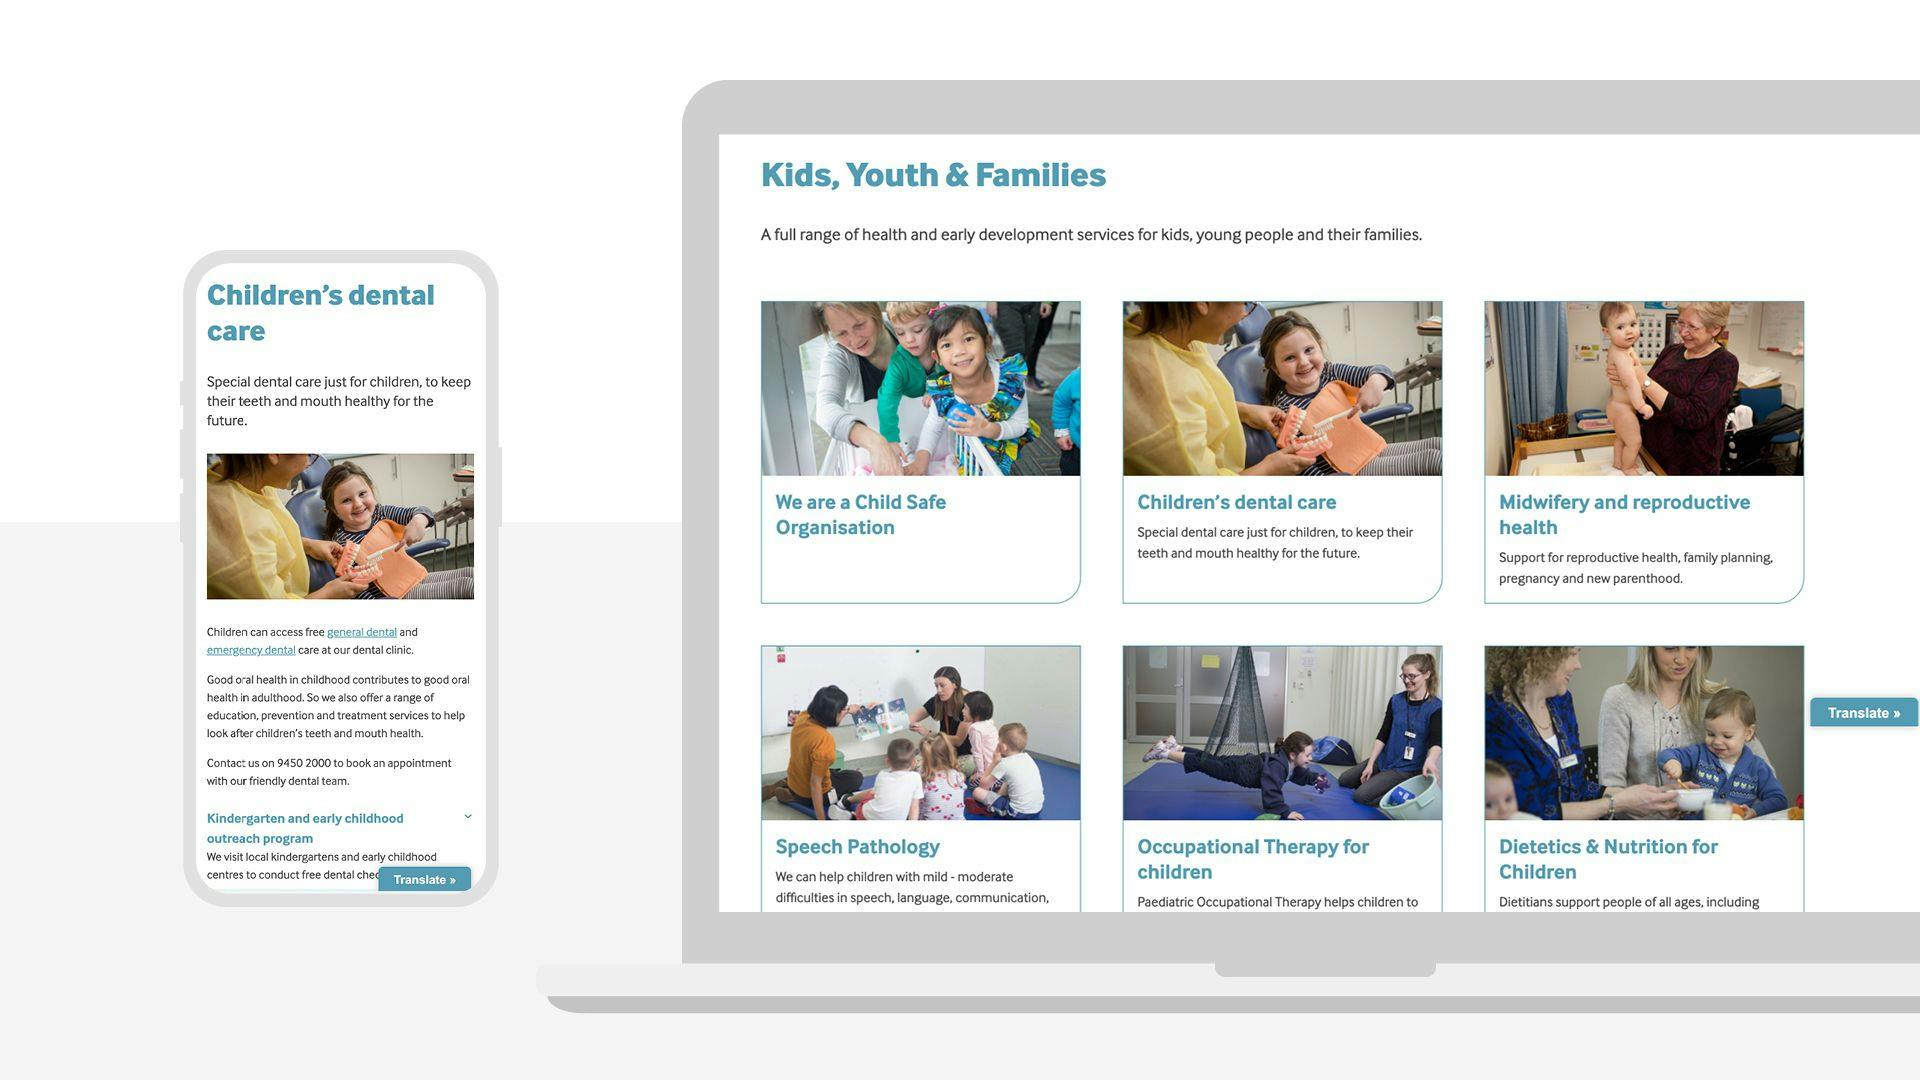 The Kids, Youth & Families hub page on the website